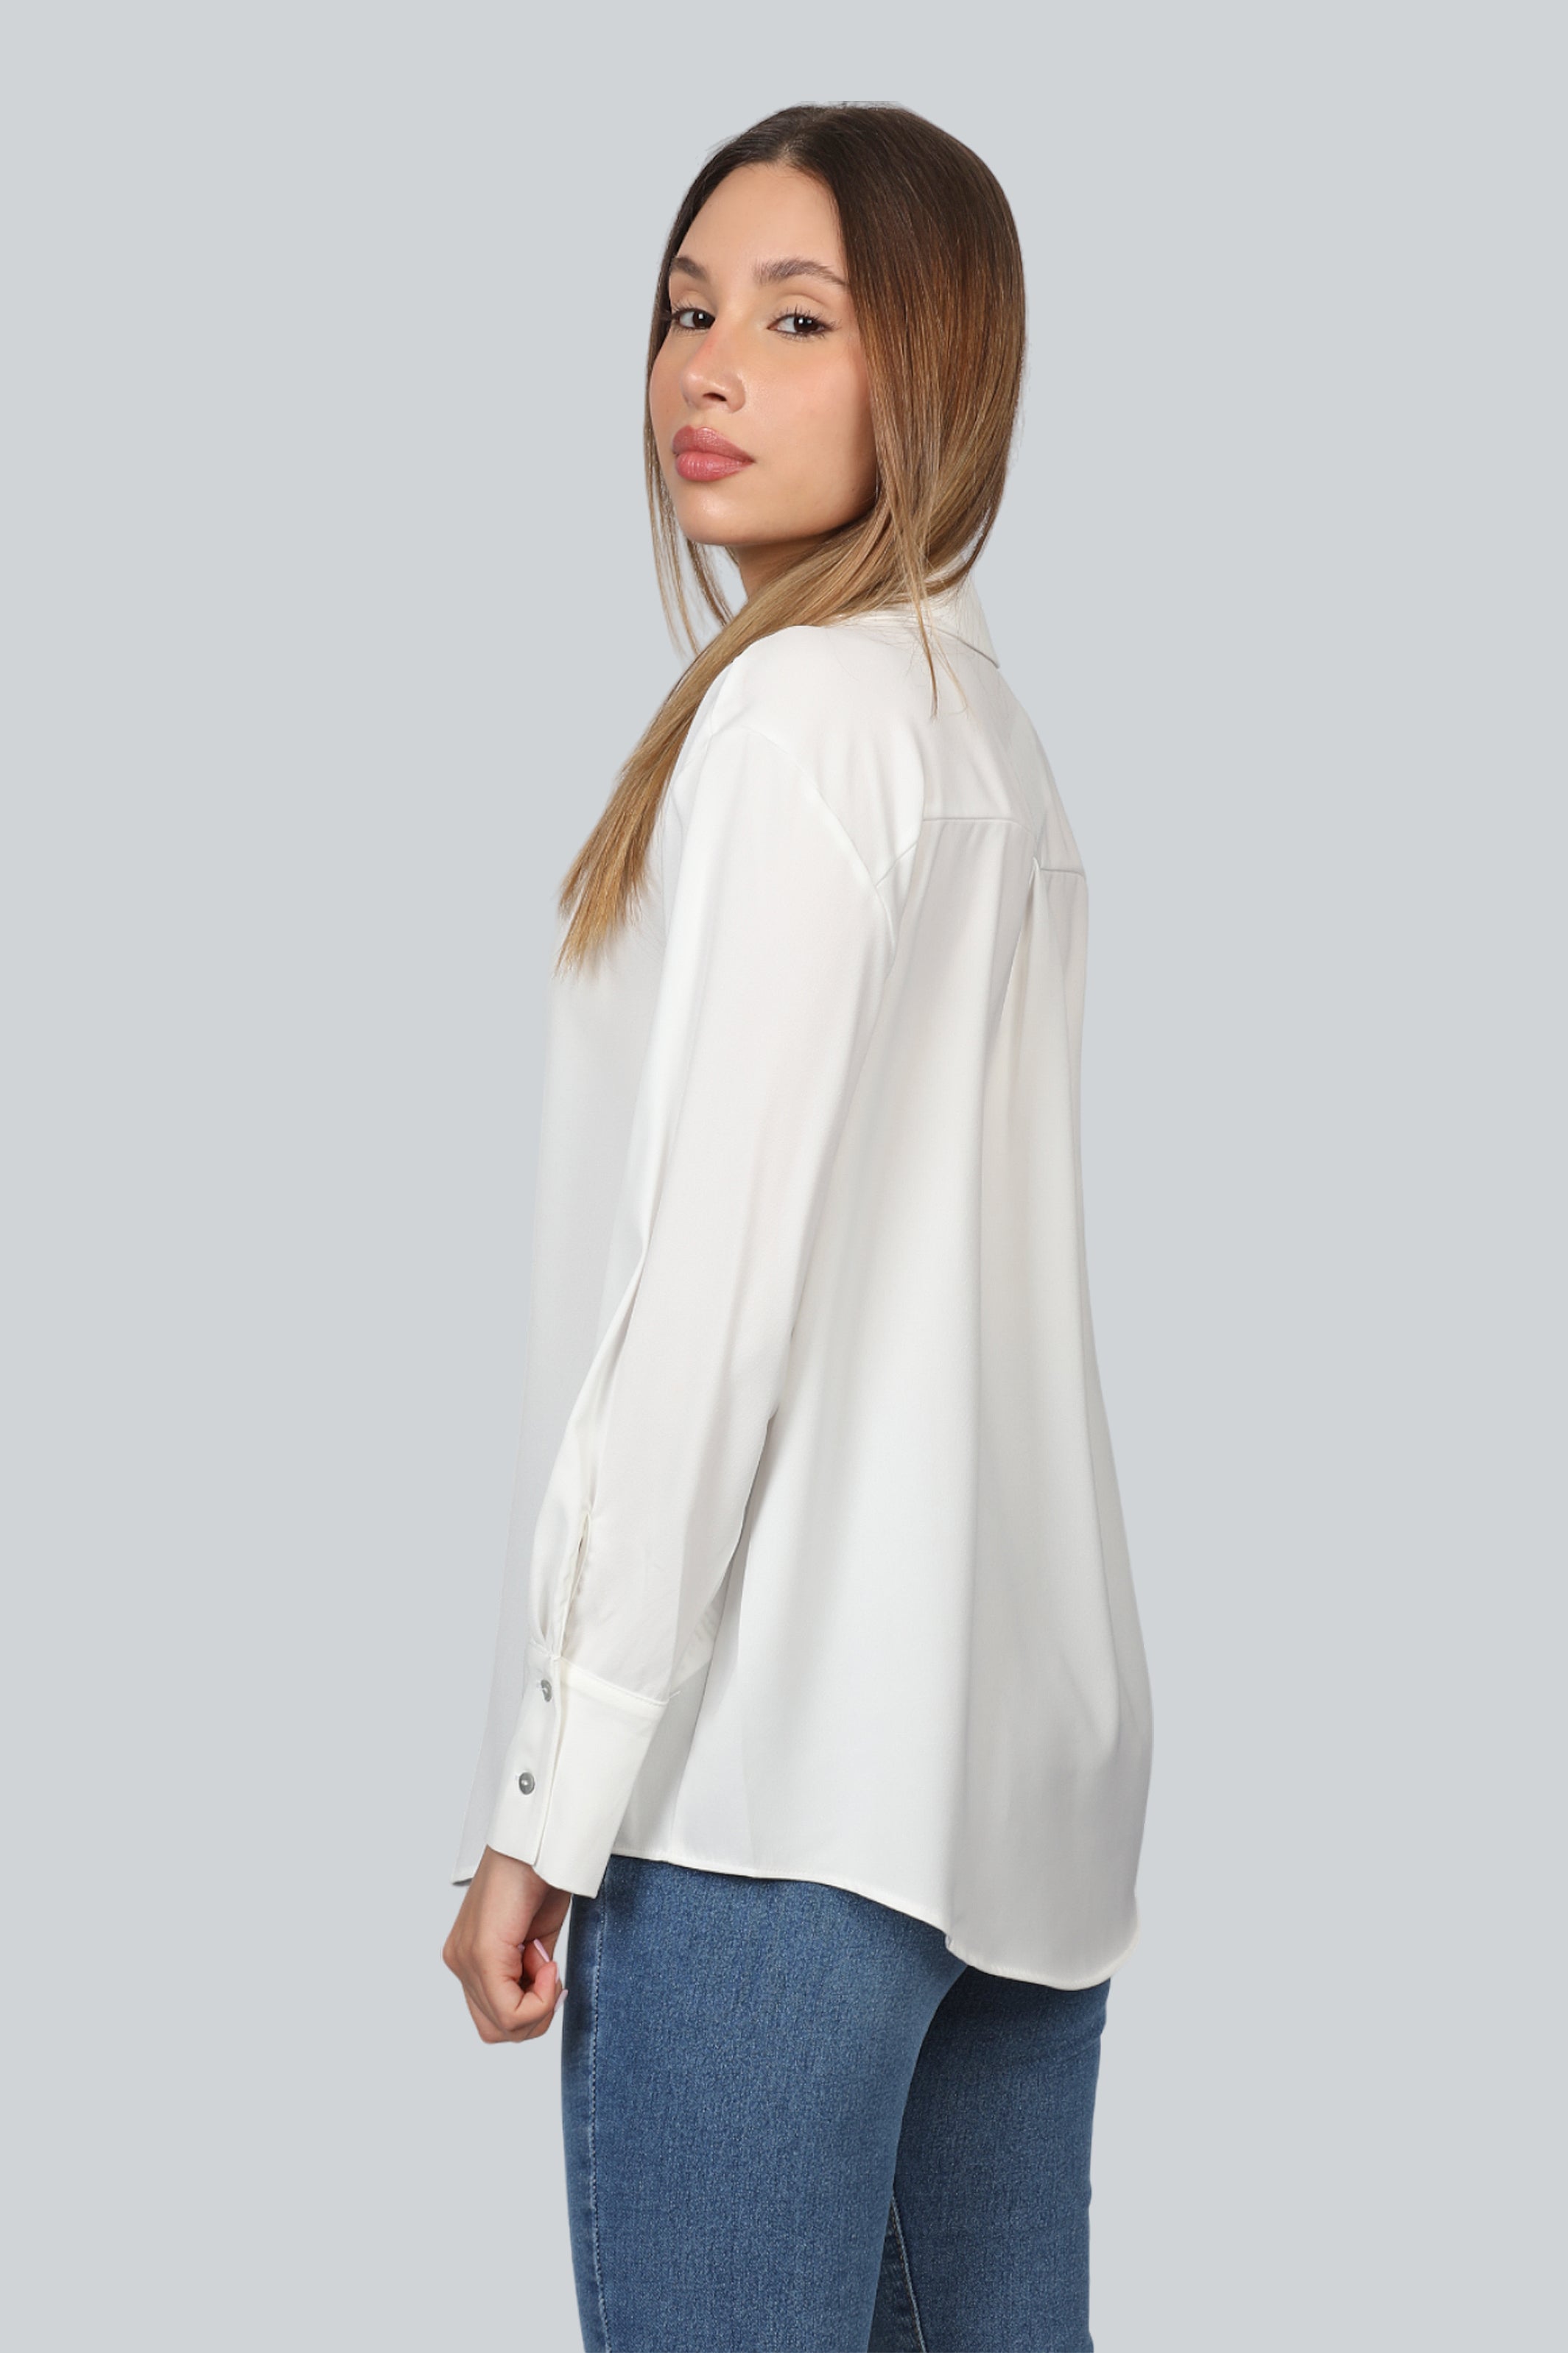 Classy White Women Shirt With Sleeves Button